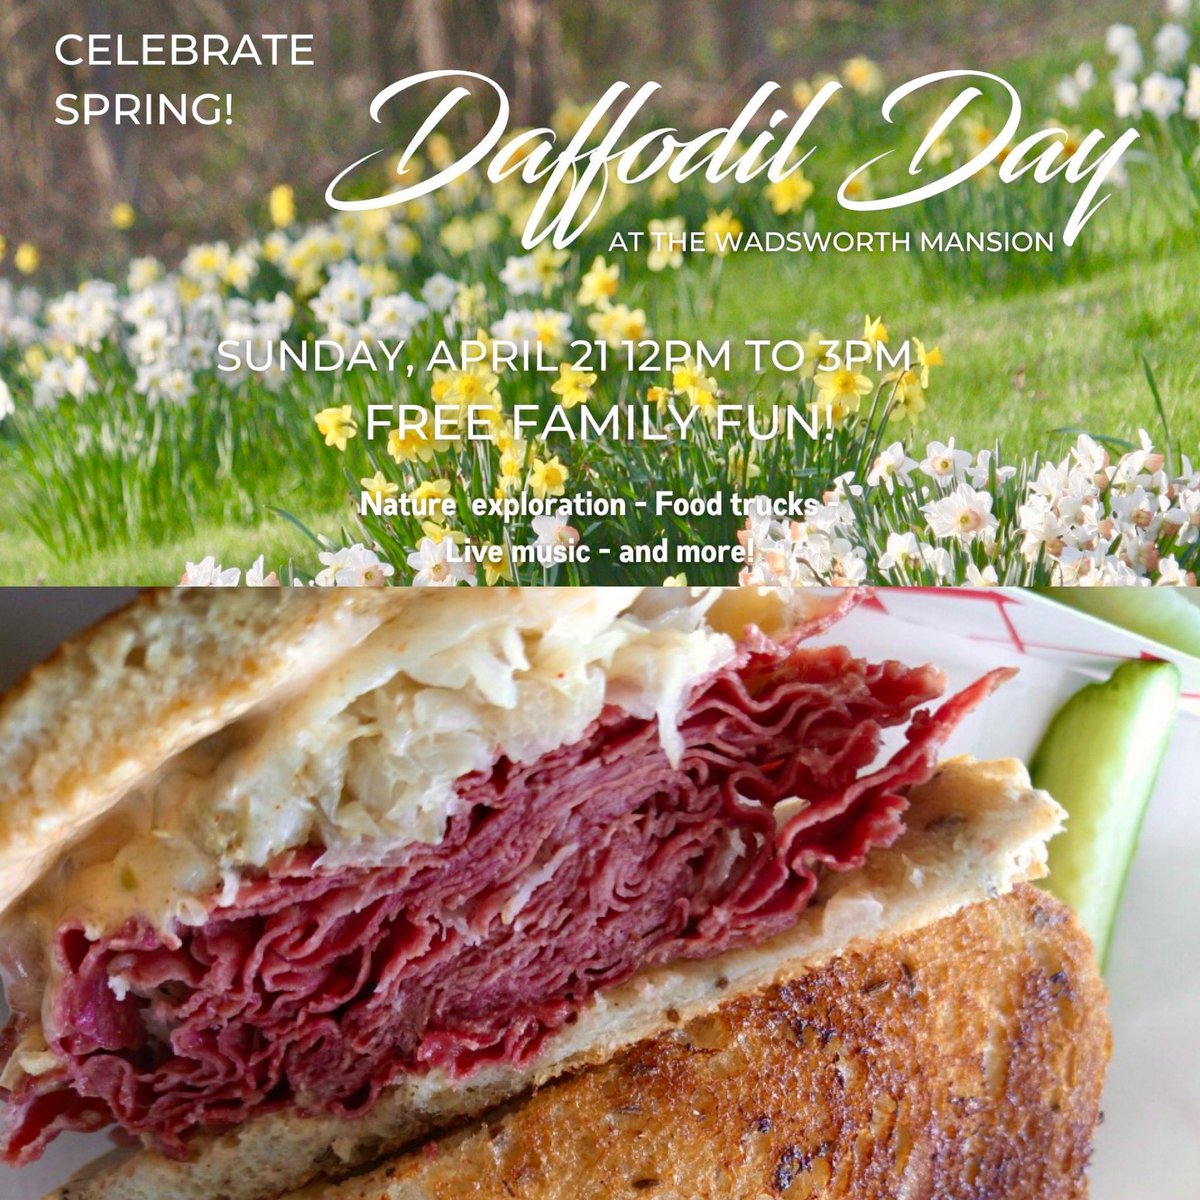 This Sun, April 21 we’re back at one of our favorite spring events, Wadsworth Mansion Daffodil Day, 12-3p! 🌼🥪  Work up an appetite while you explore nature. Family friendly - live music - rain or shine - free admission! 

📍 421 Wadsworth St #MiddletownCT

#SkyscraperSandwiches